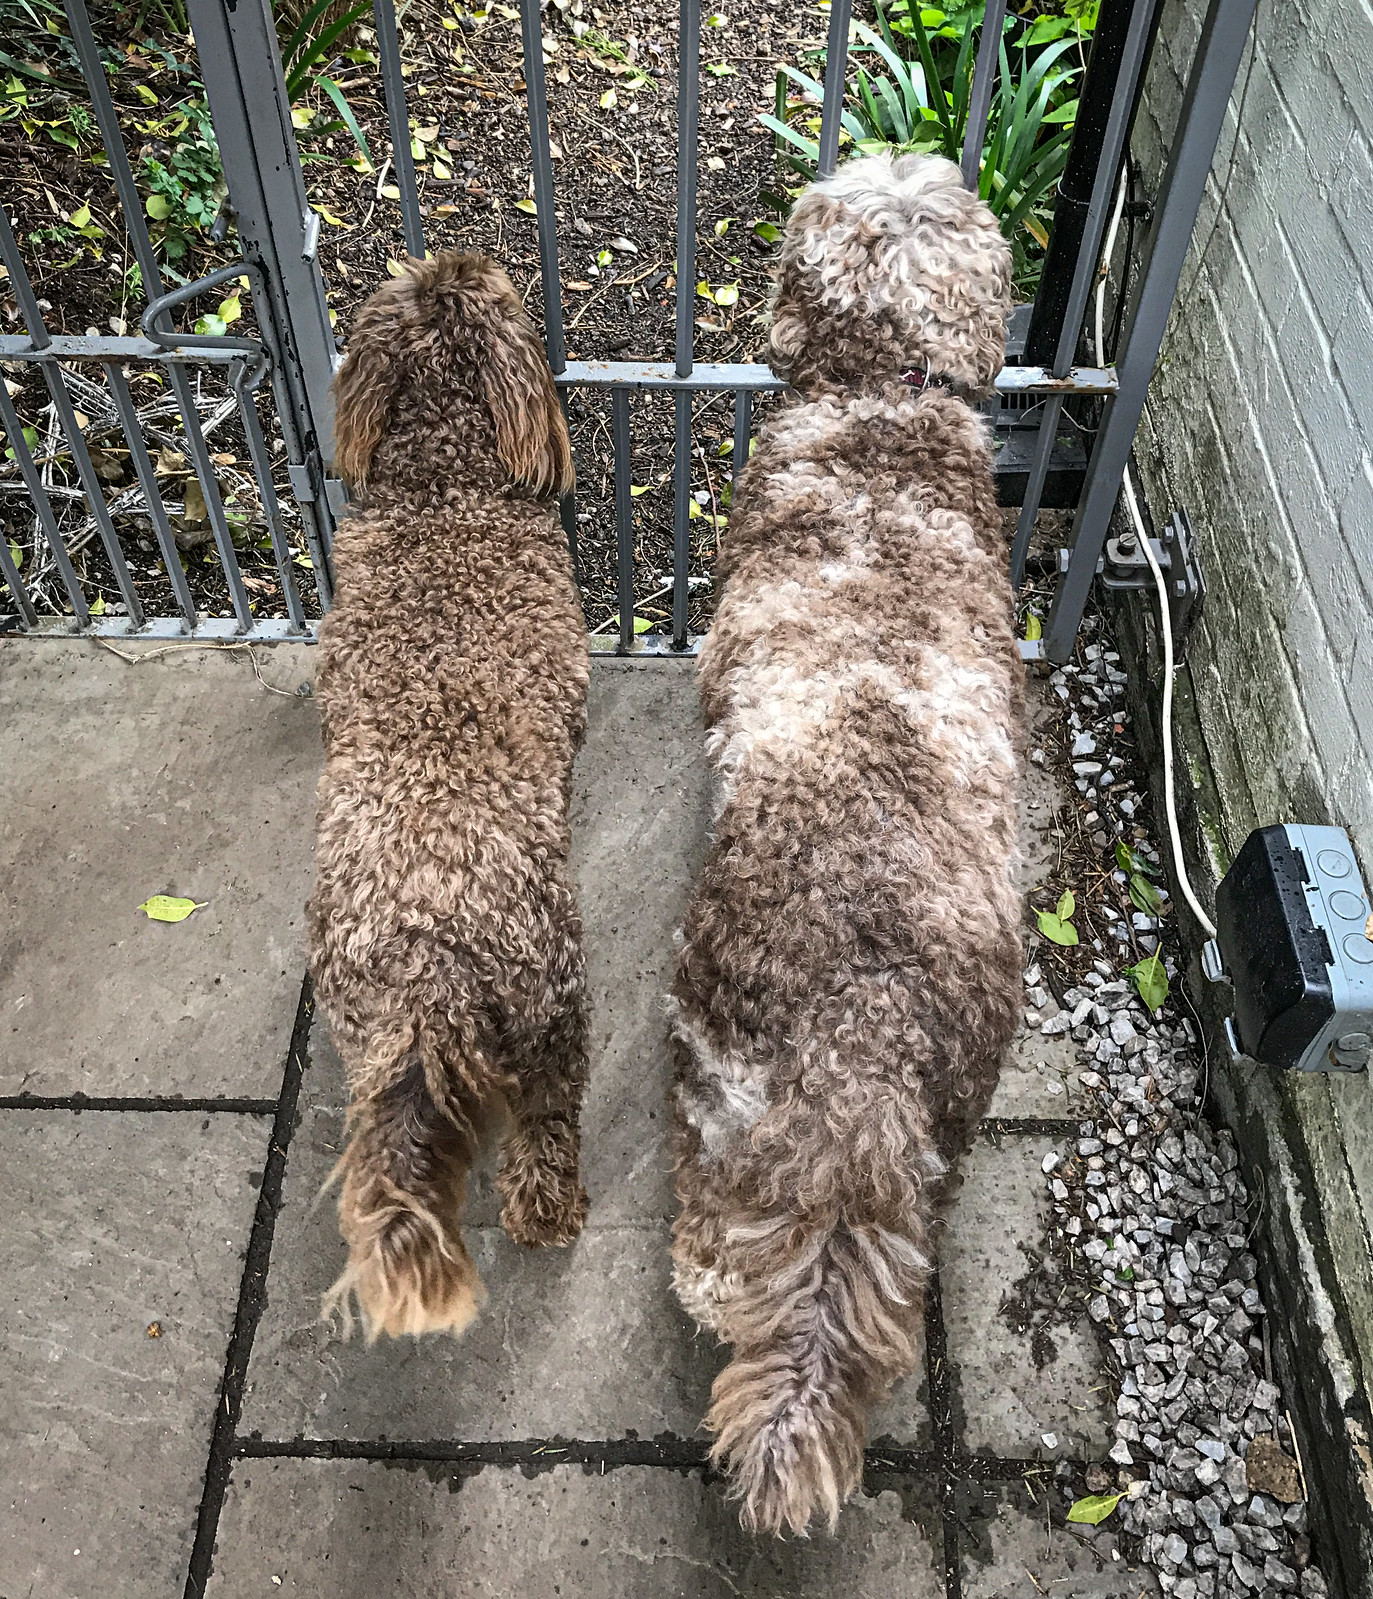 This gate is the only thing between us and those rabbits!